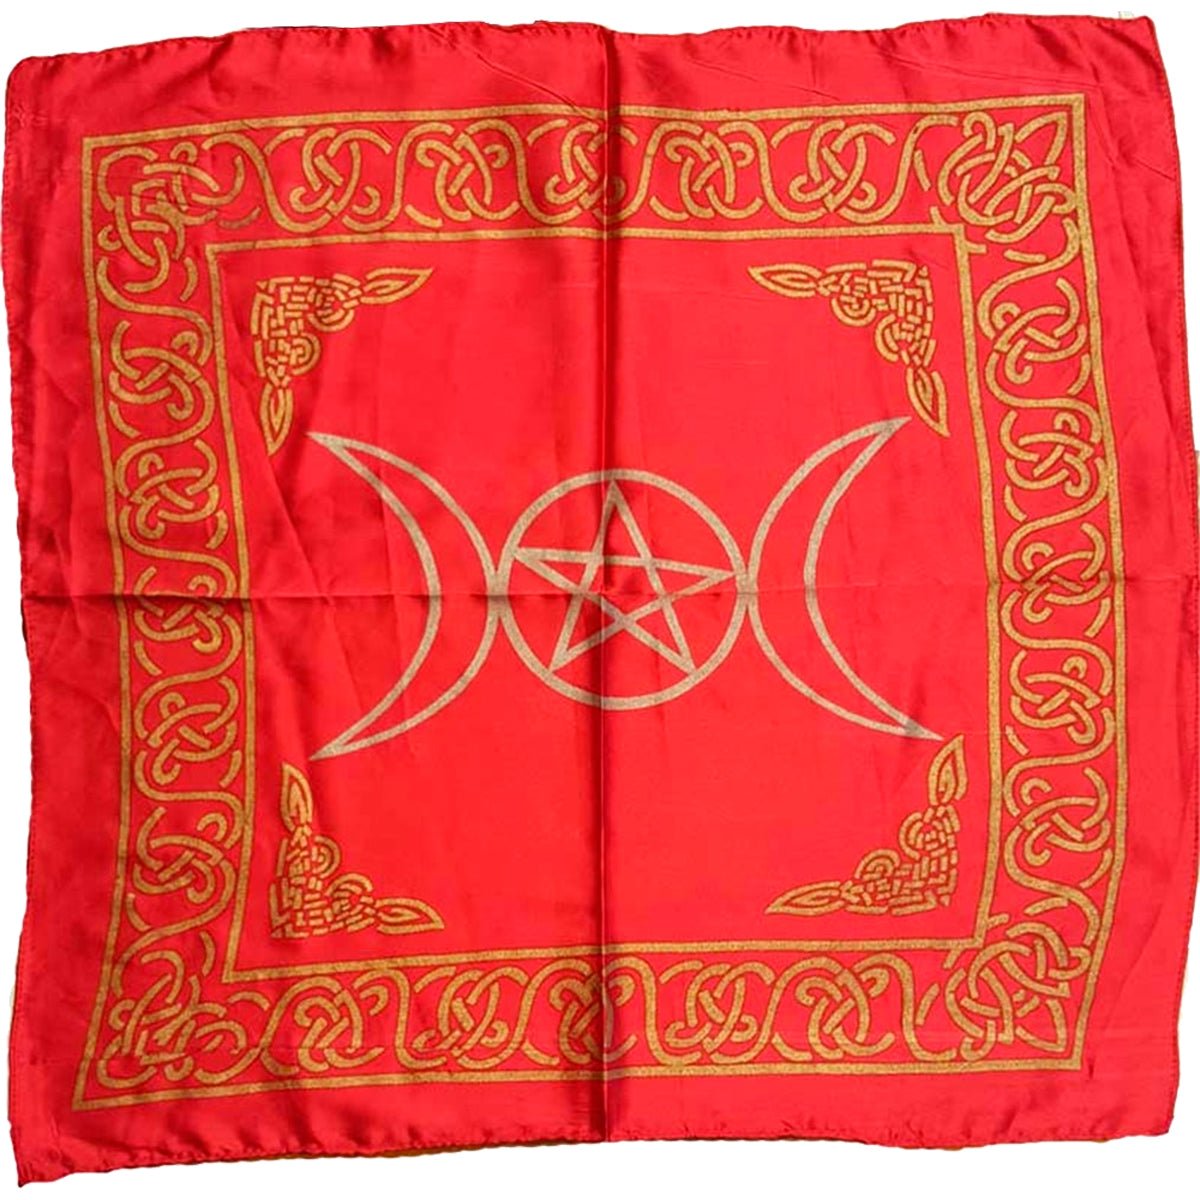 Triple Moon Altar Cloth Red - 13 Moons